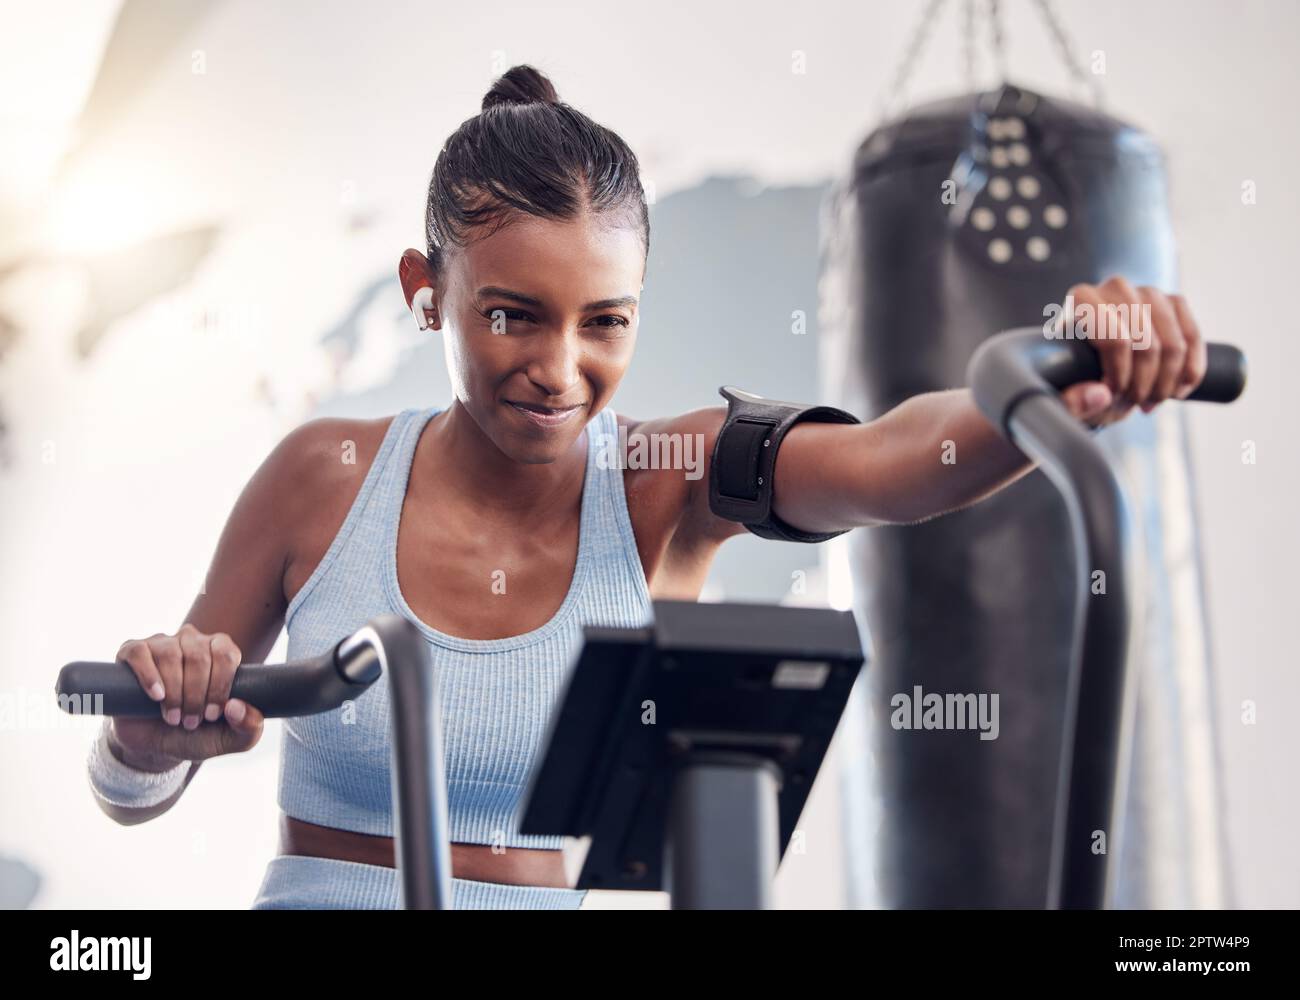 Full body strong sportswoman hanging on gymnastic rings and swinging while  exercising during intense training in dark gym stock photo